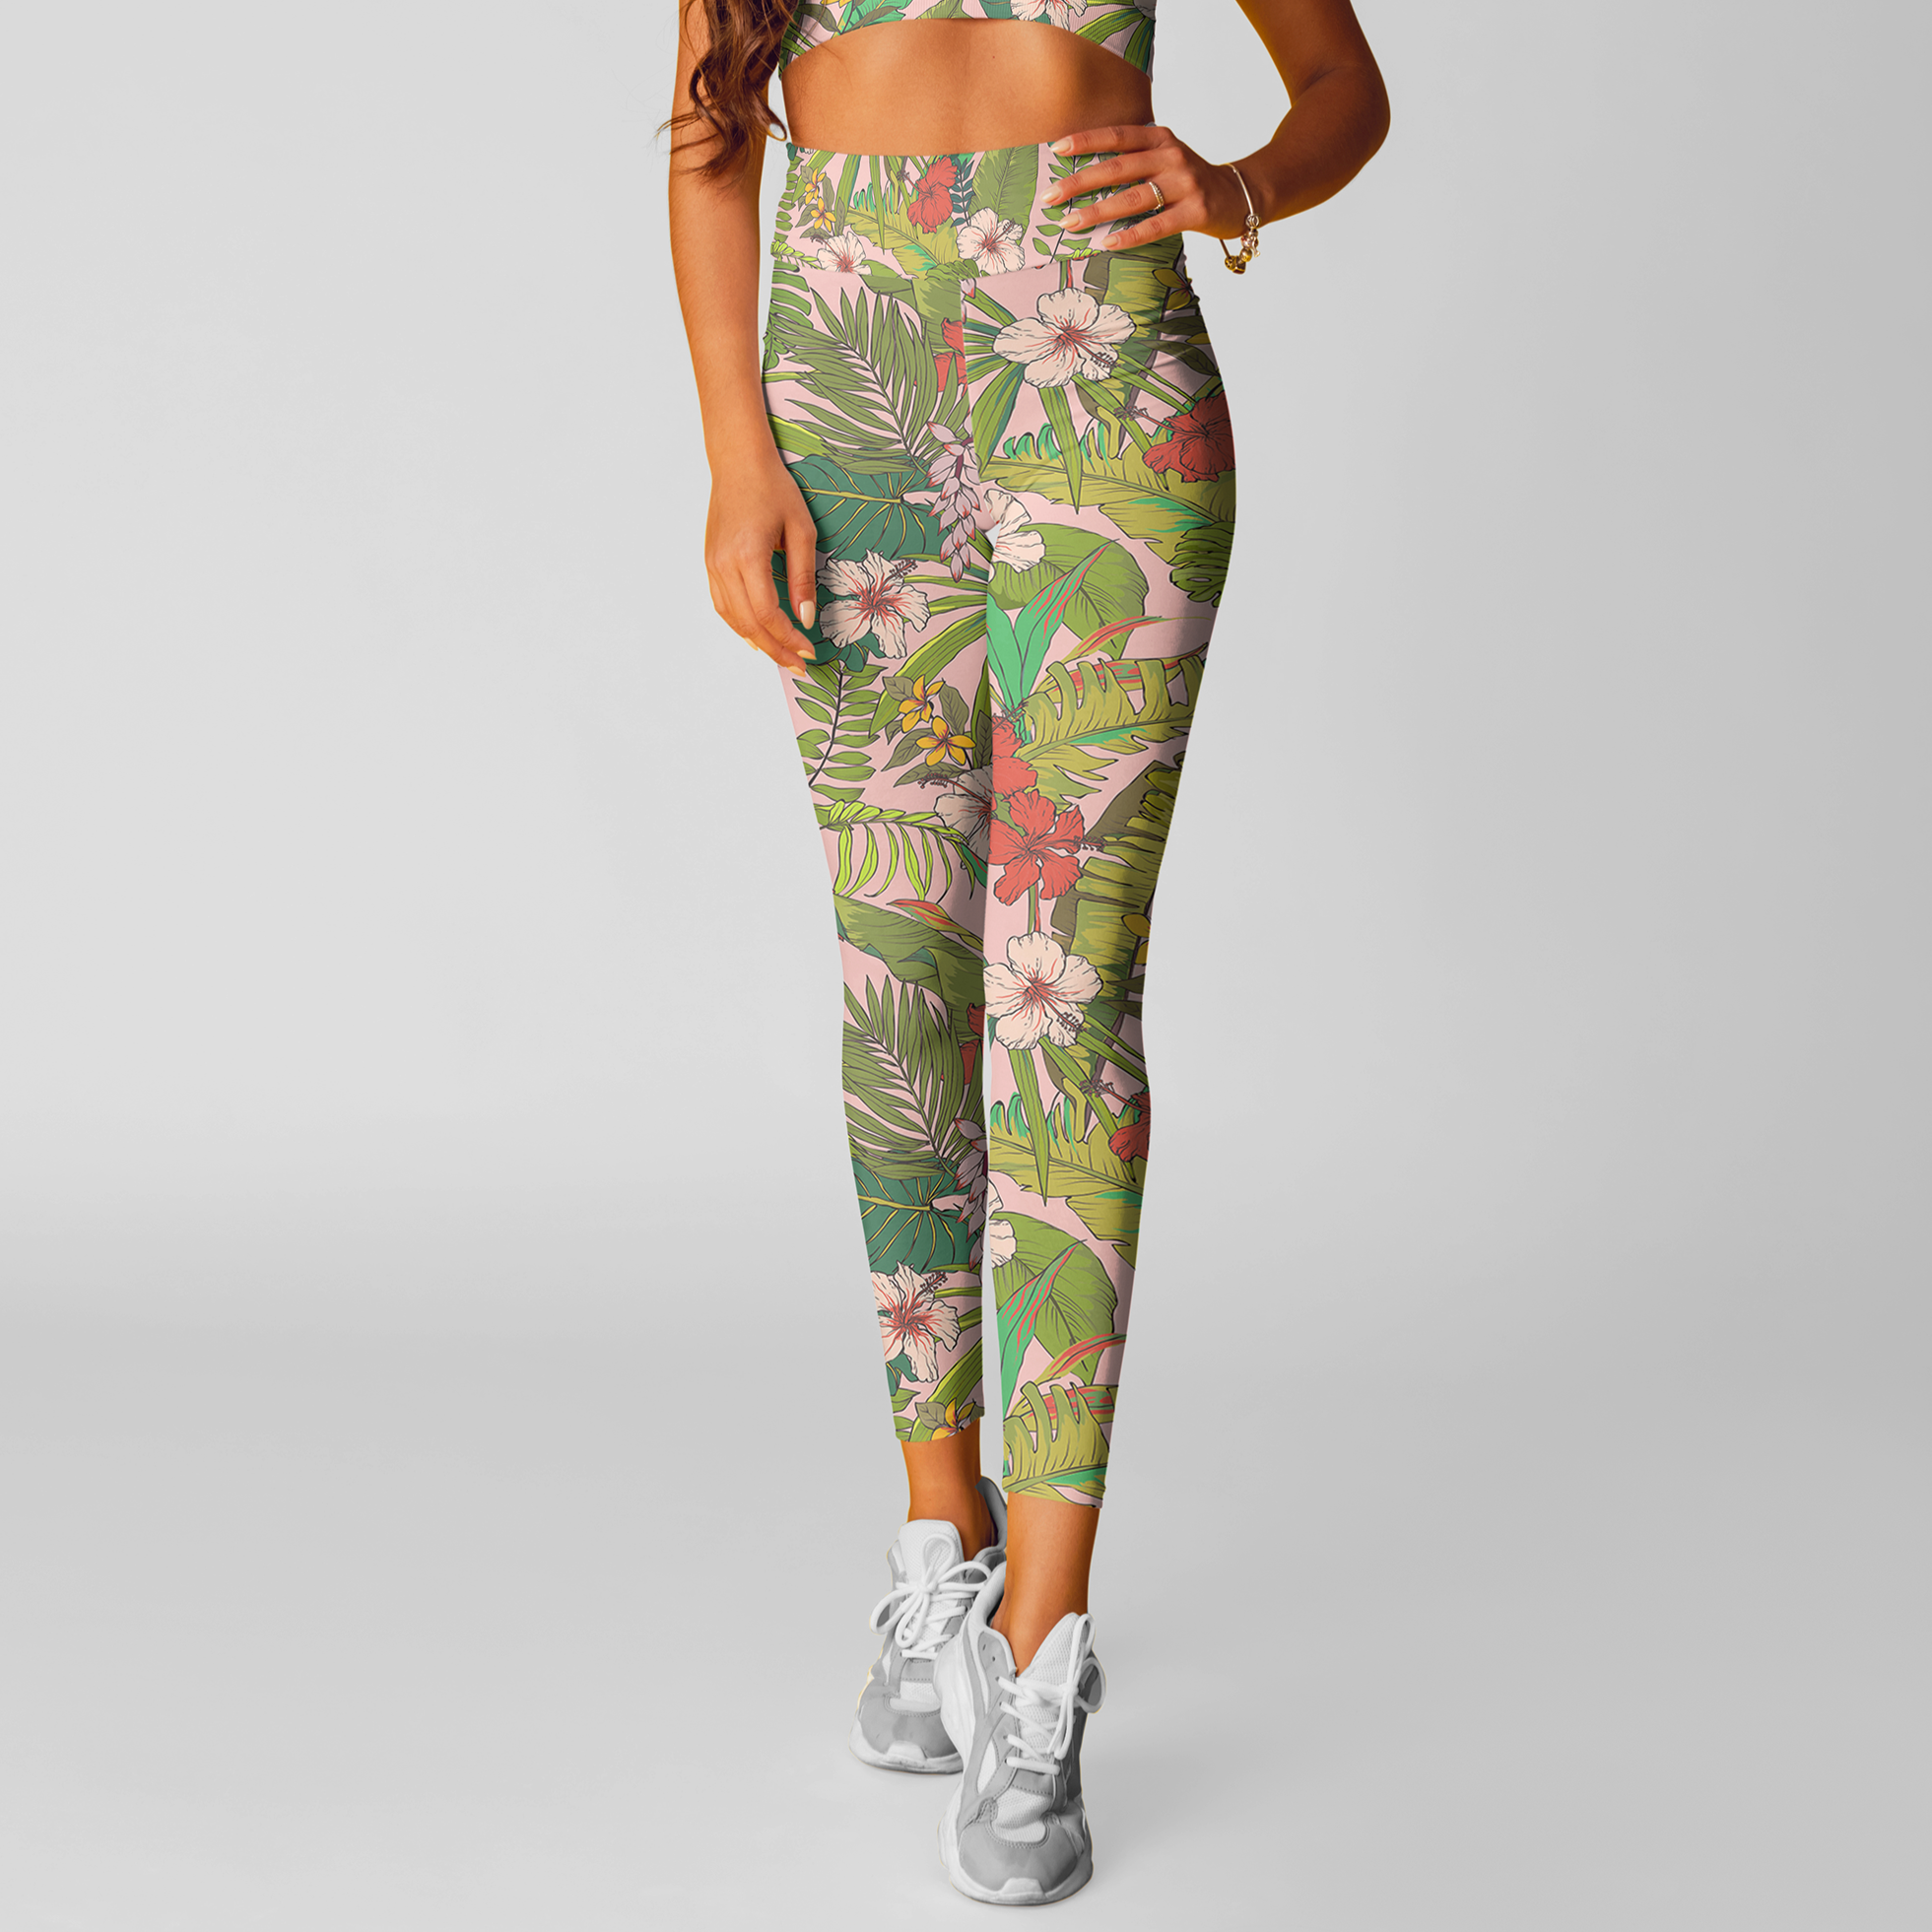 Lemon Slices and Tropical Ferns Beautiful Leggings One Size Curvy